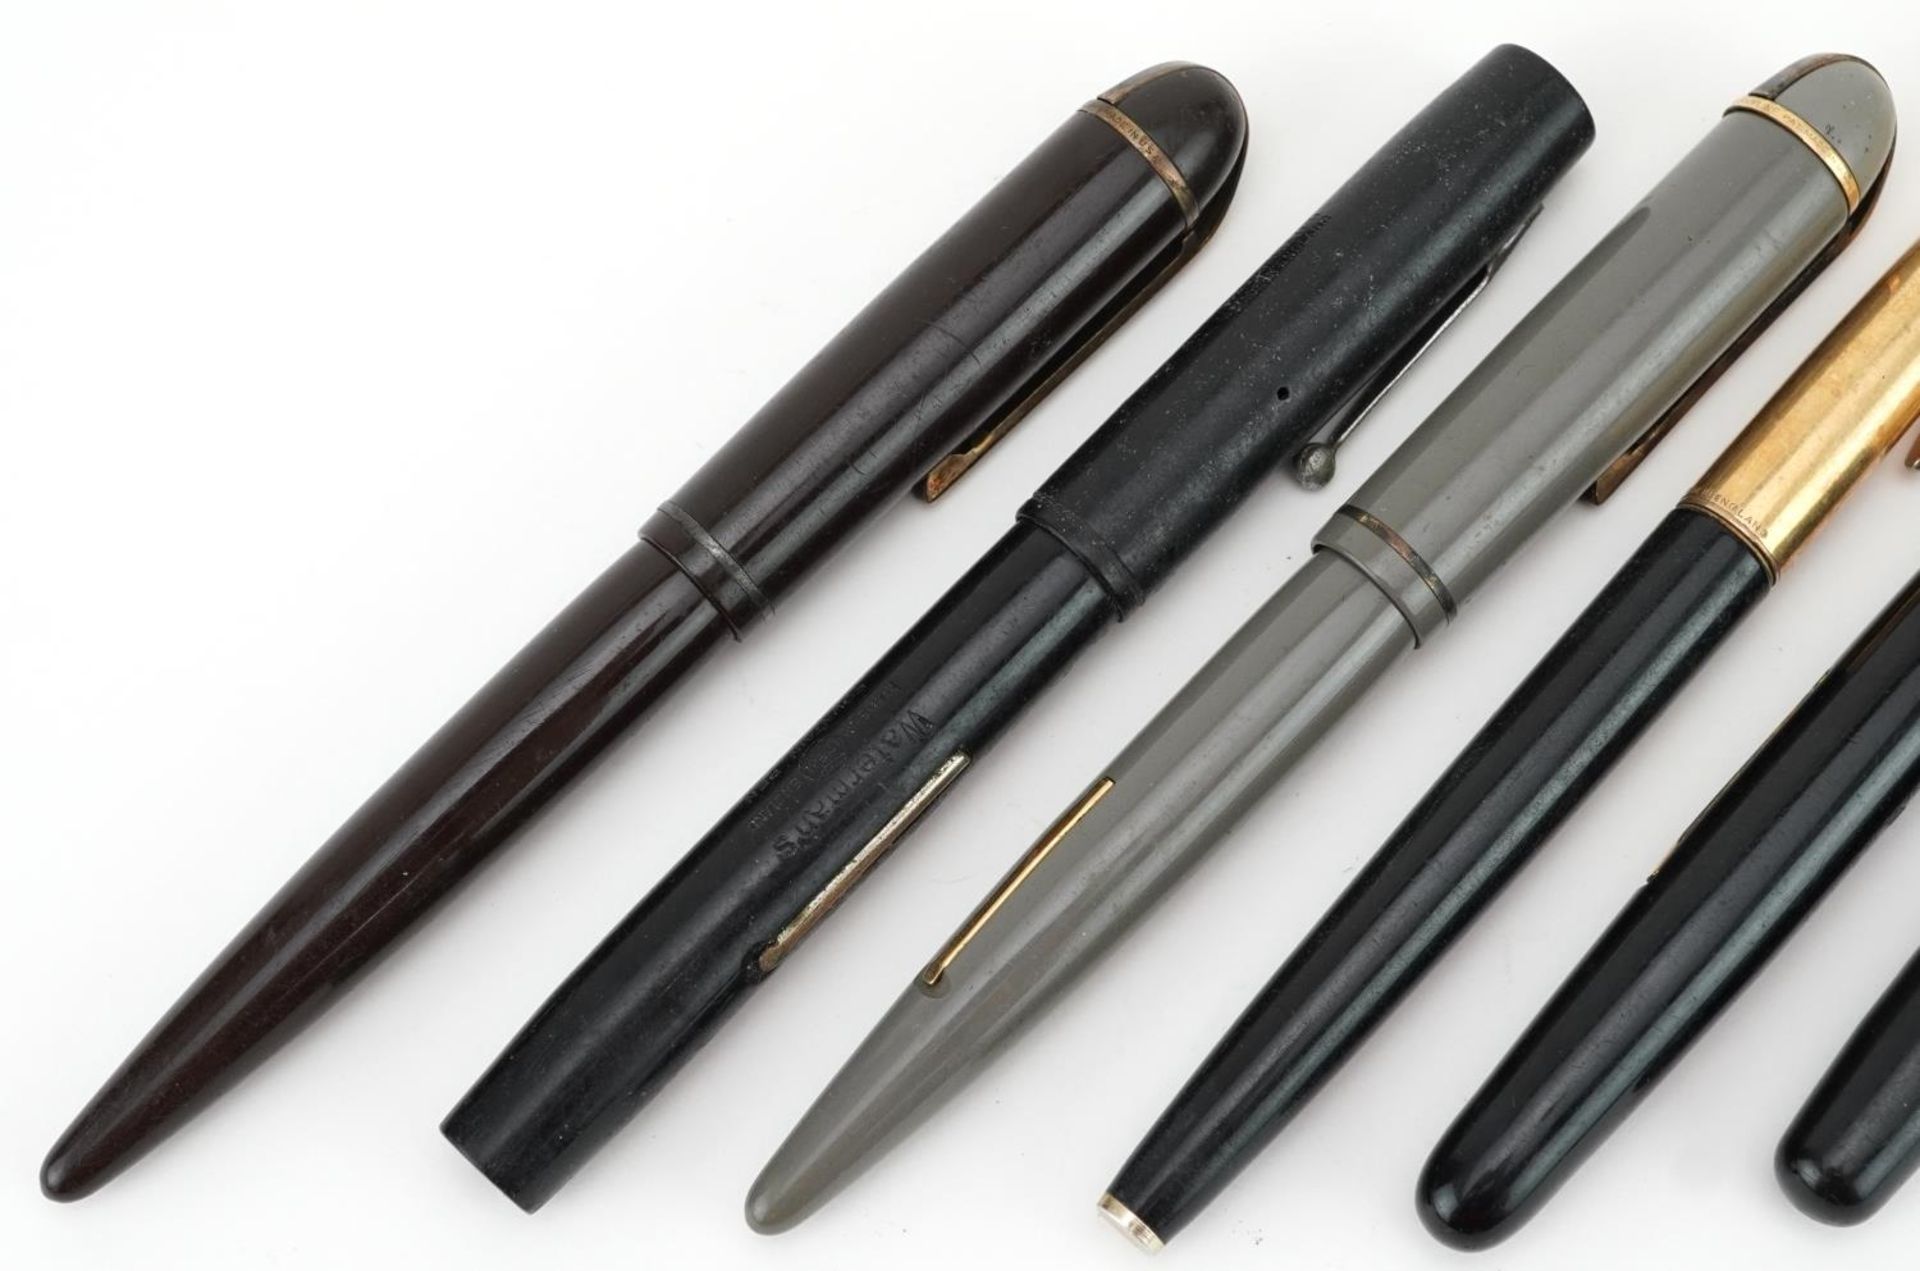 Four vintage Watermans fountain pens and two vintage Eversharp Skyline fountain pens, five with gold - Image 2 of 4